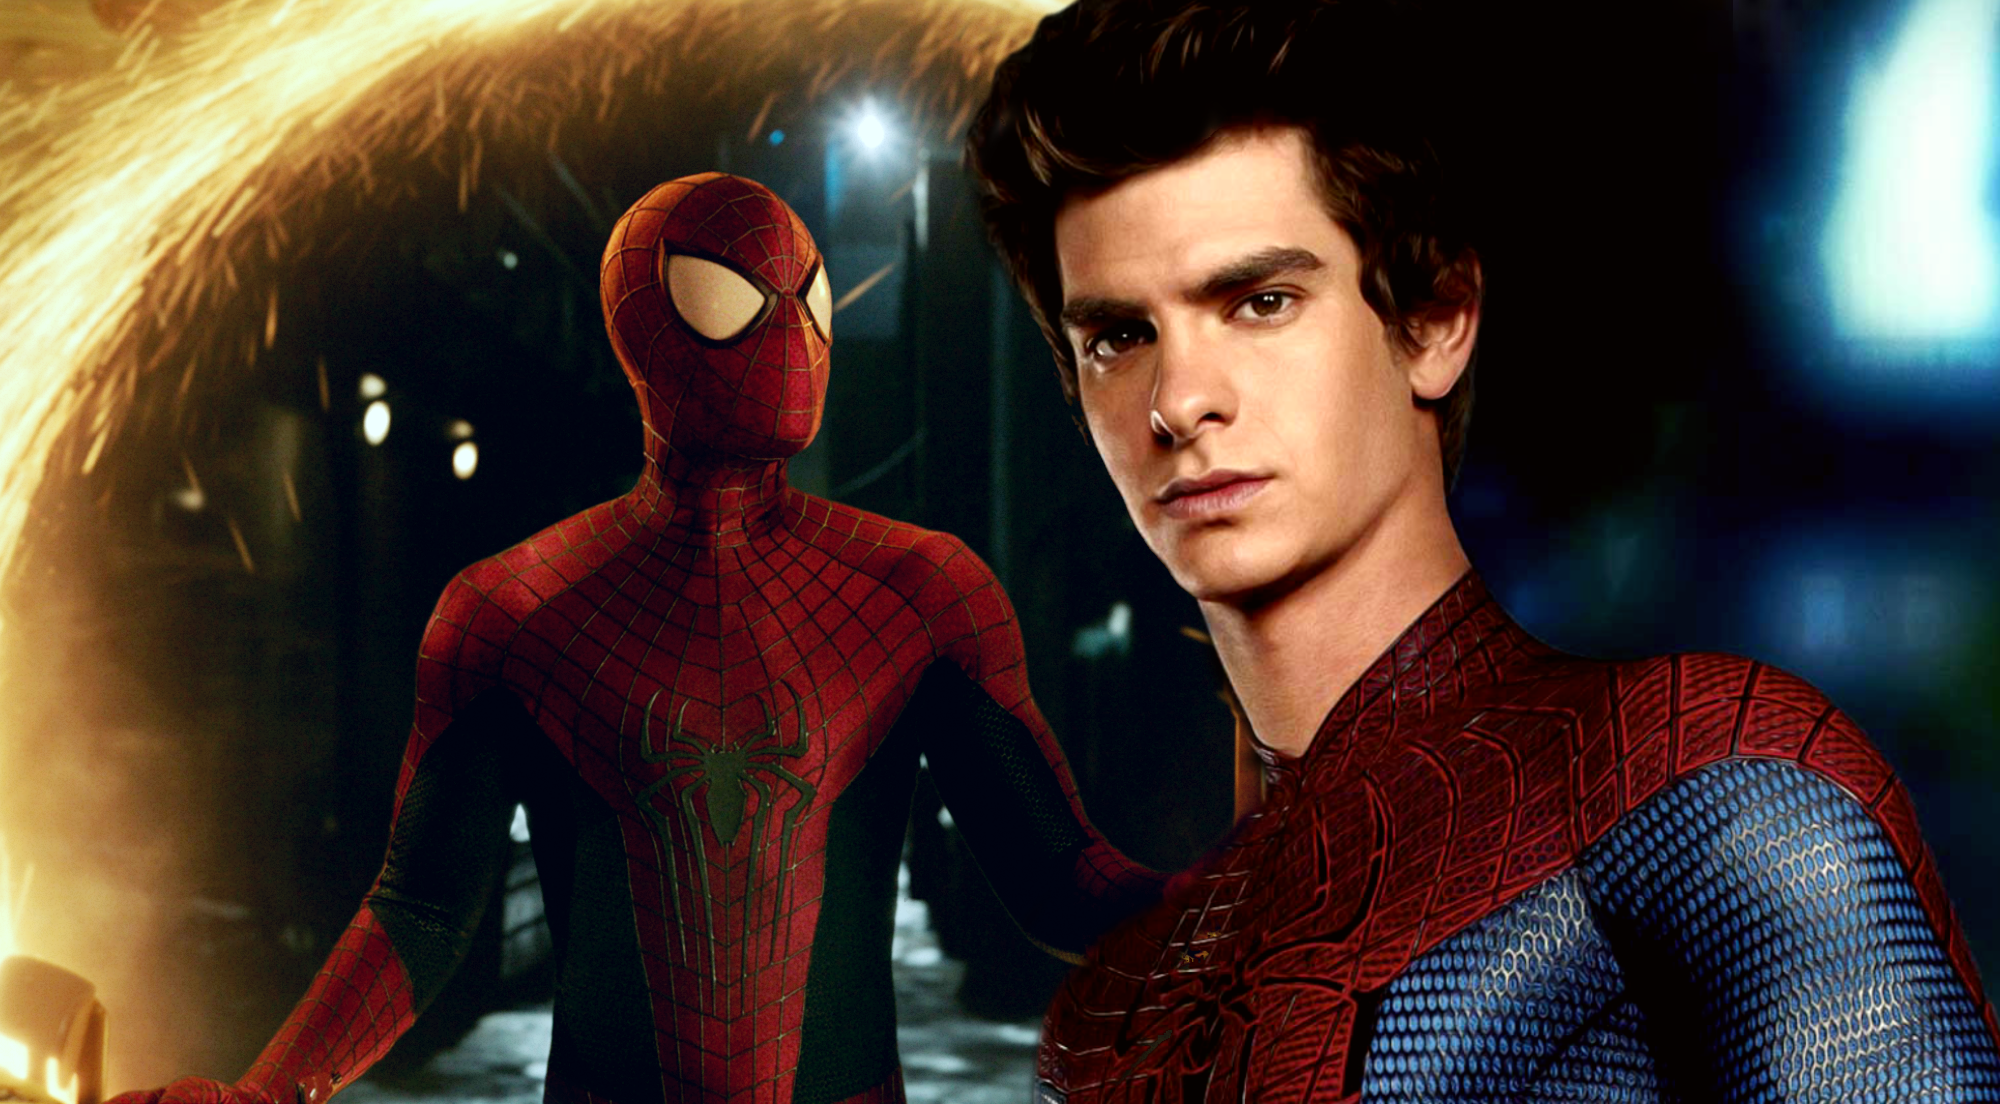 Andrew Garfield as Peter 3, or Spider-Man, in No Way Home